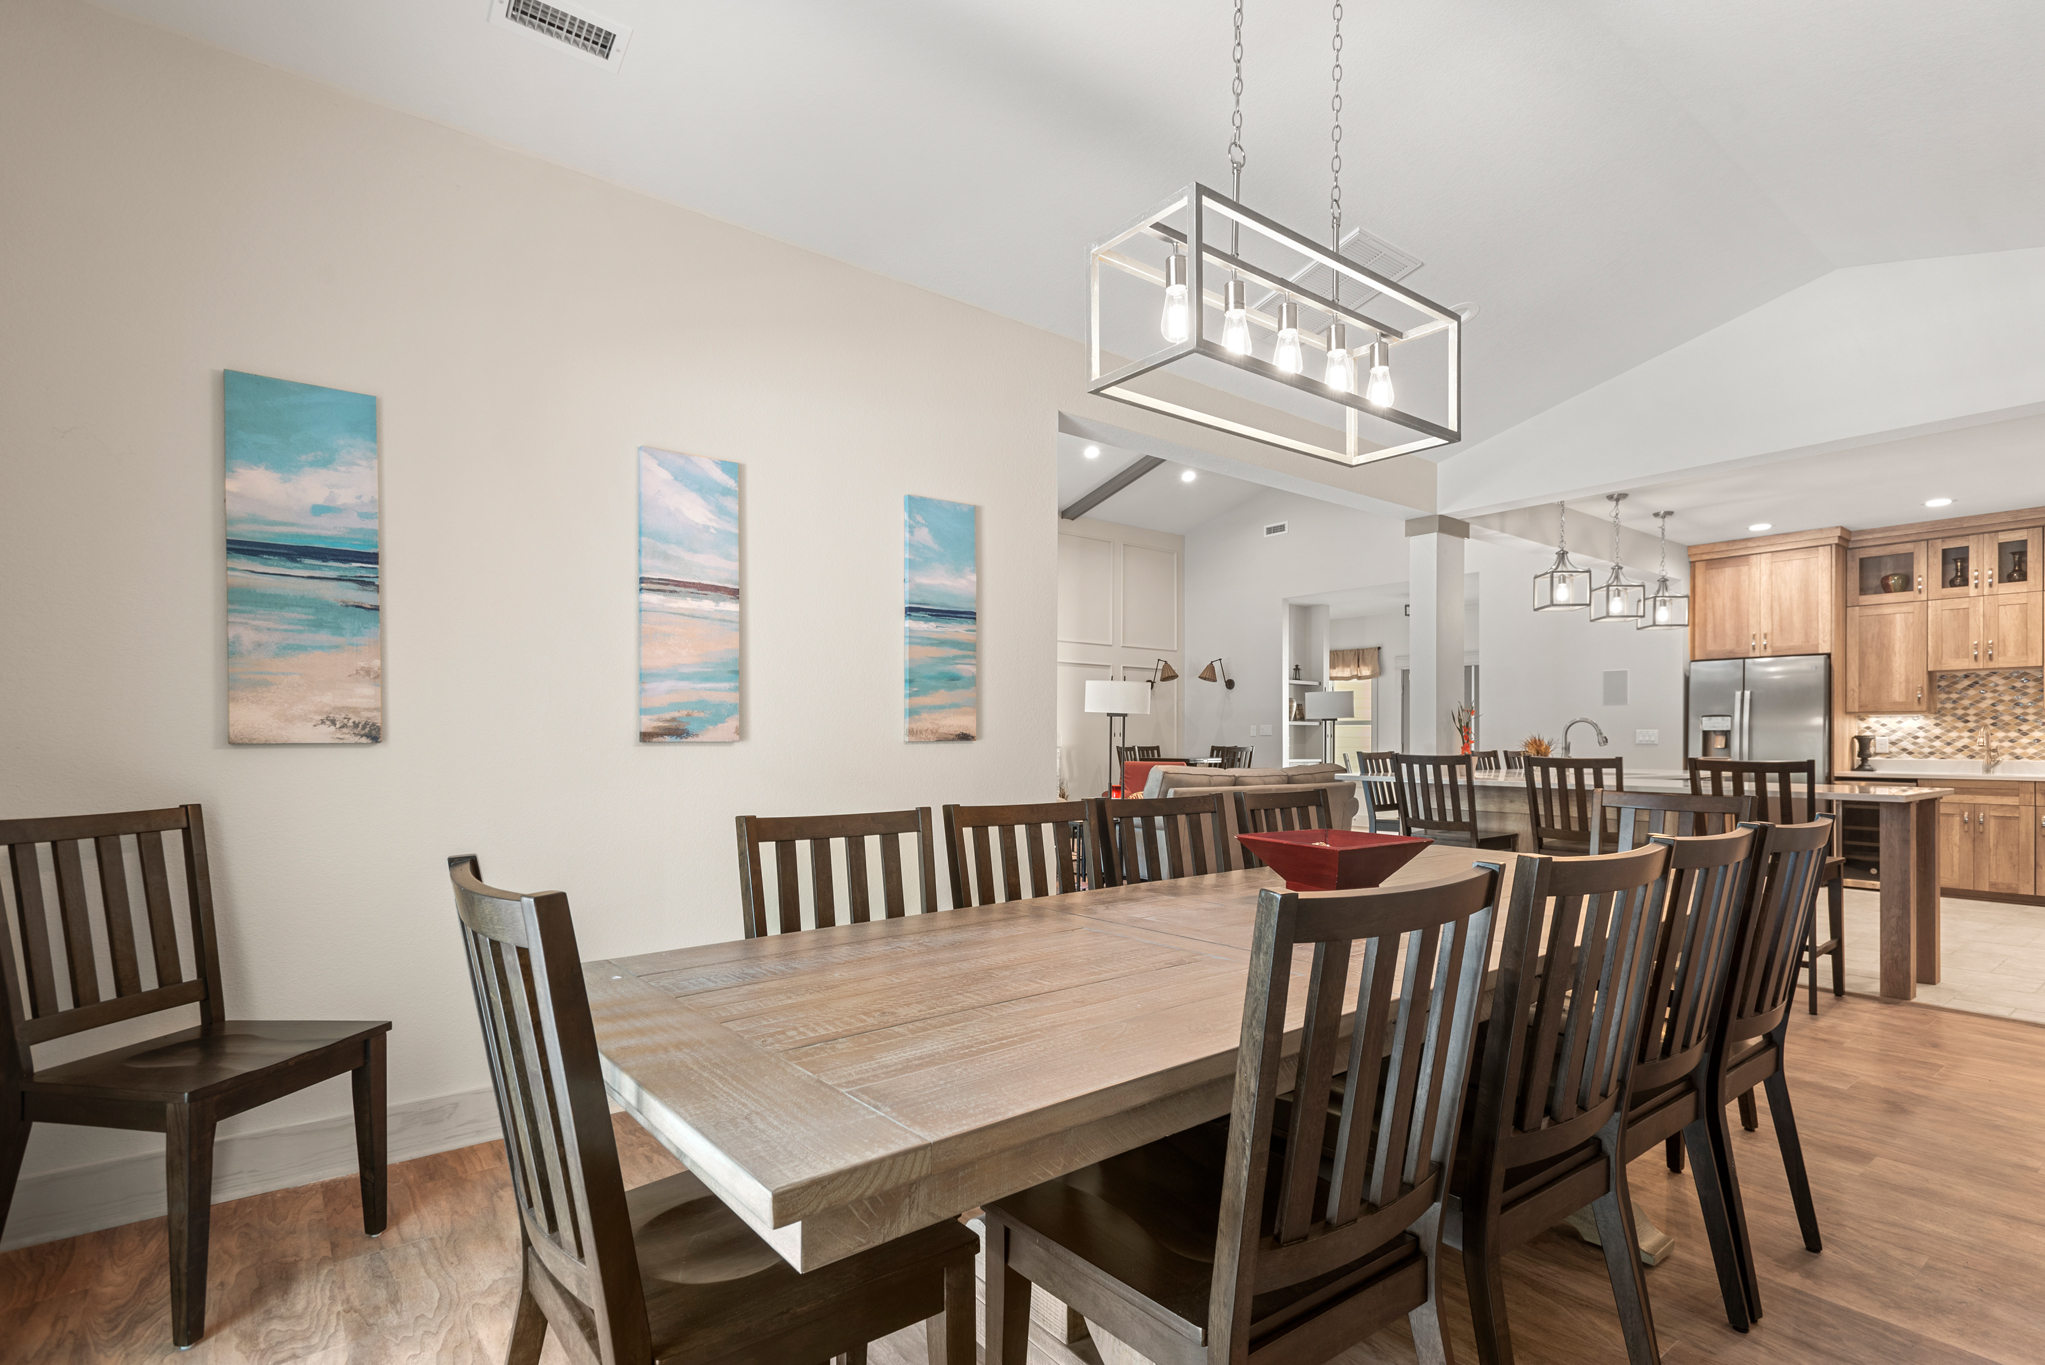 CC087: Breeze The Day | Dining Area